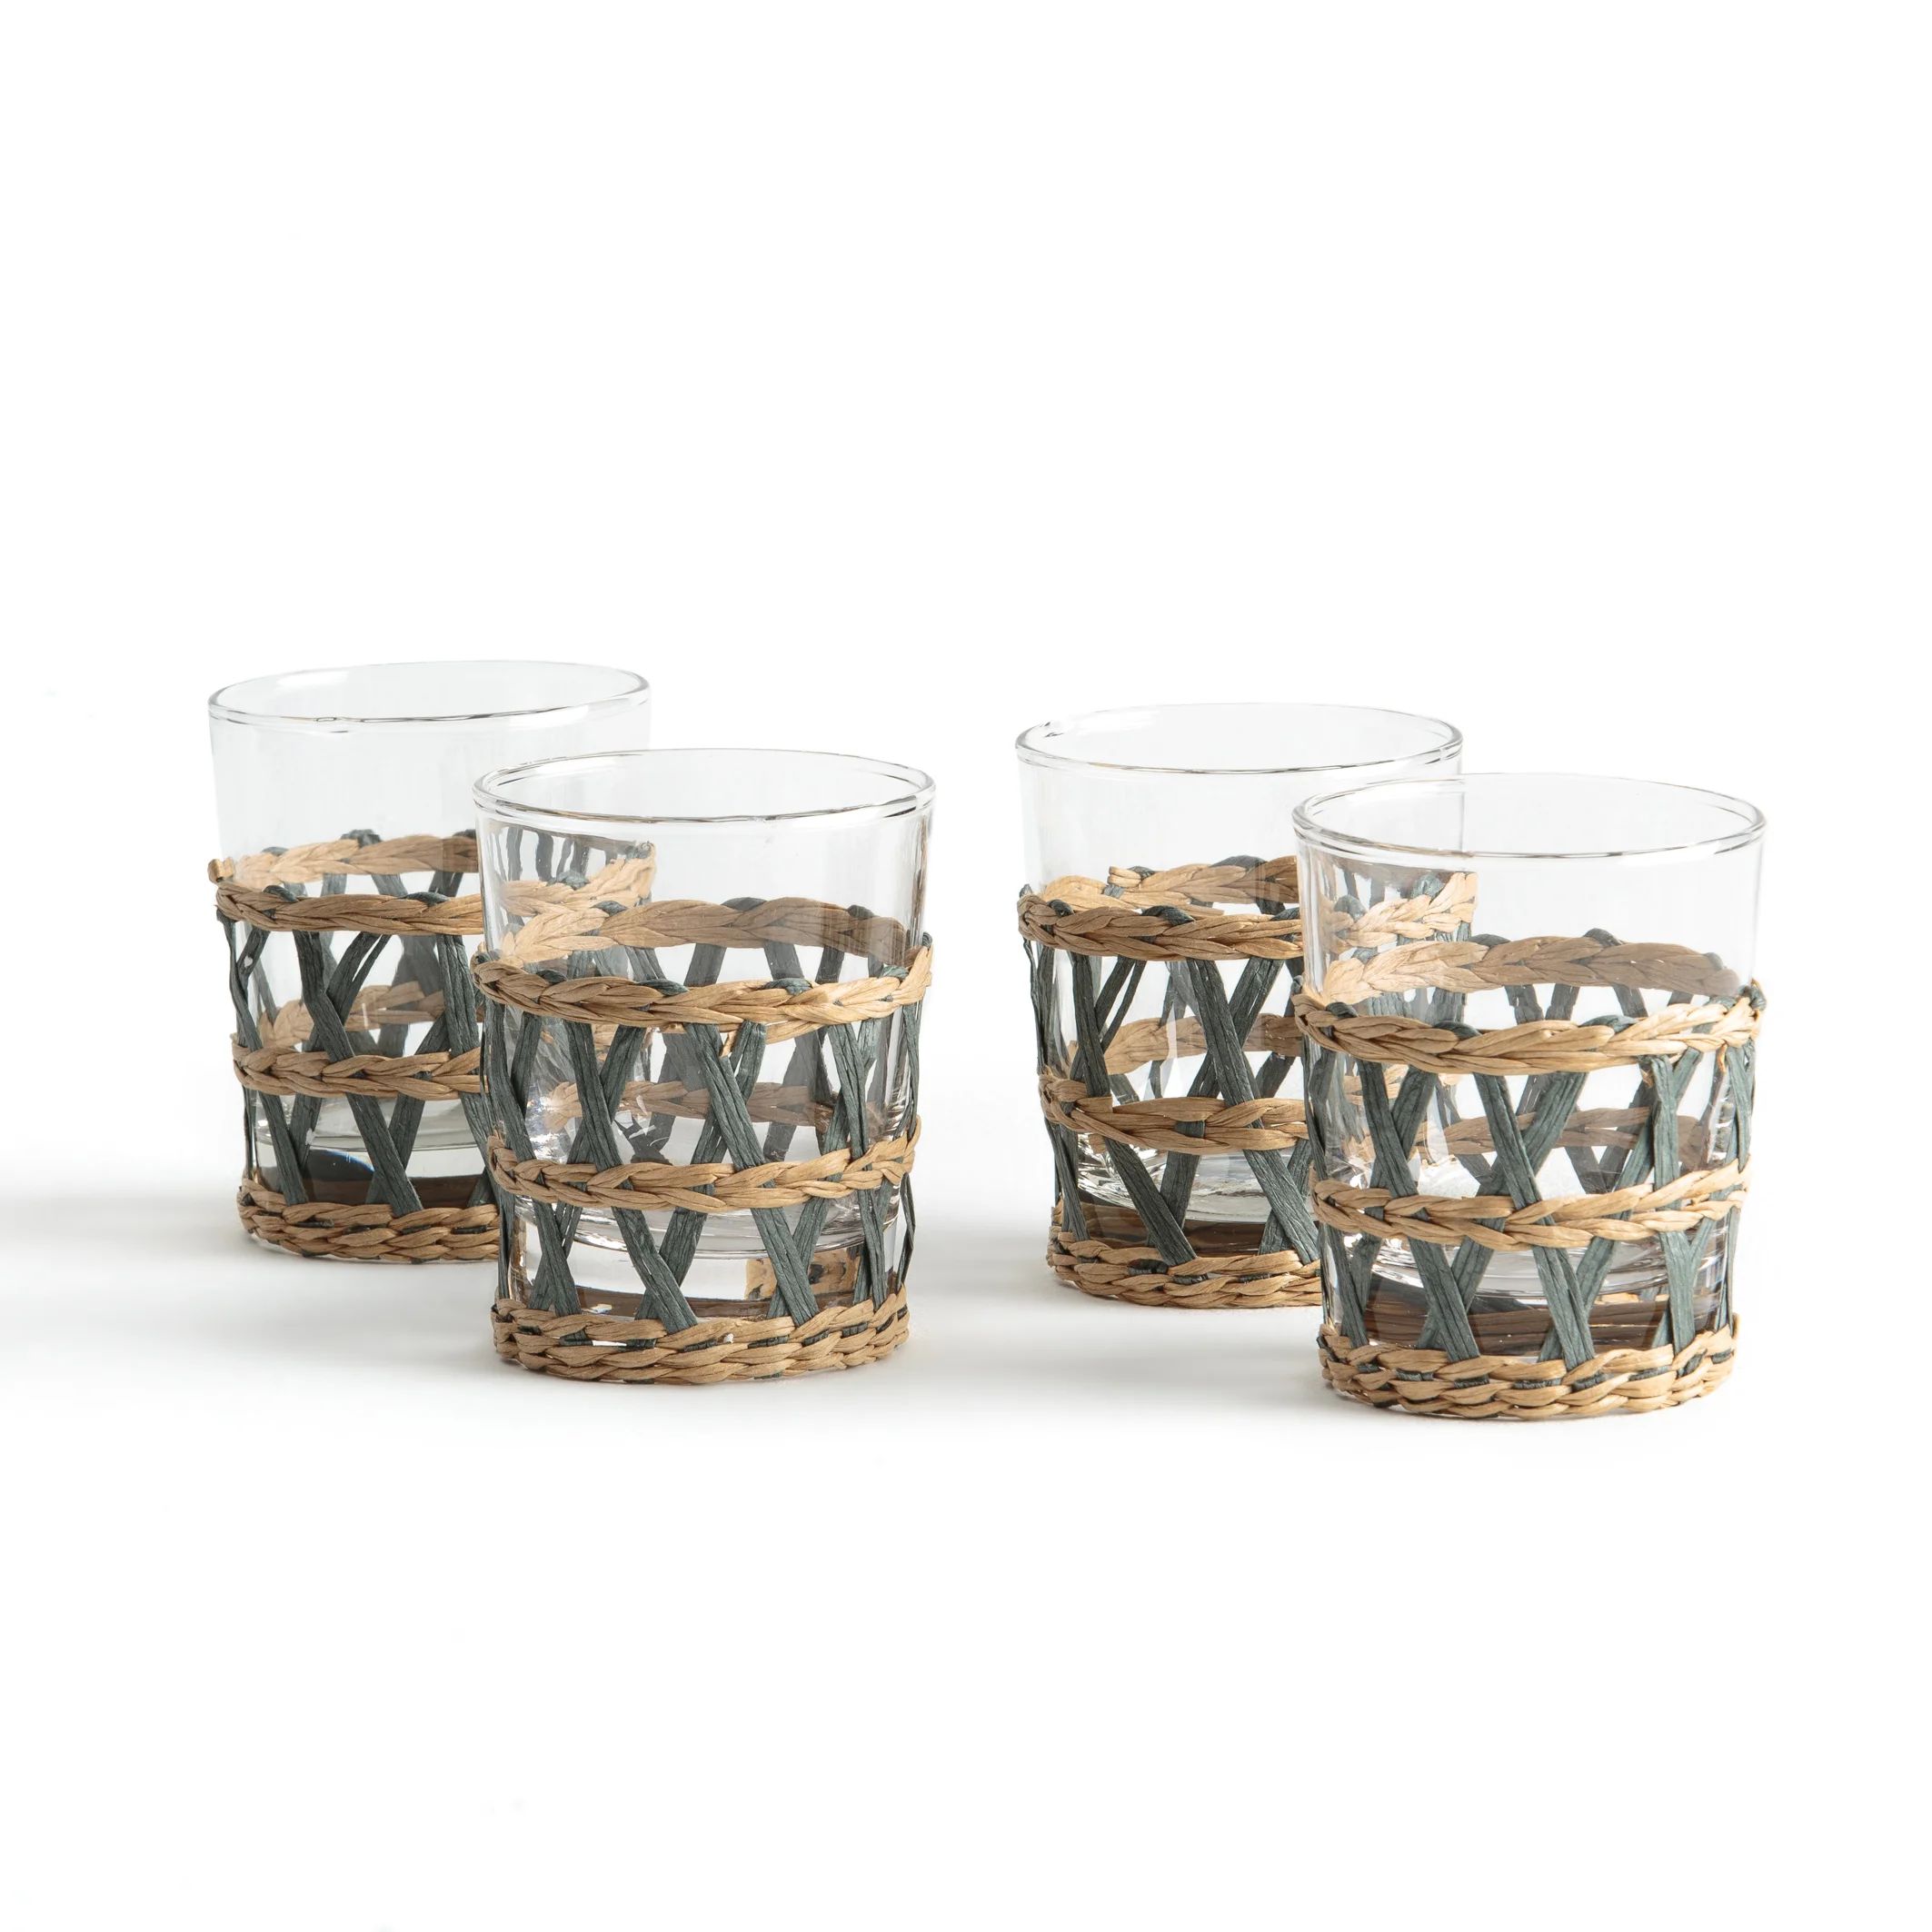 Qualimna Glasses with Woven Base, Set of 4 | La Redoute (UK)